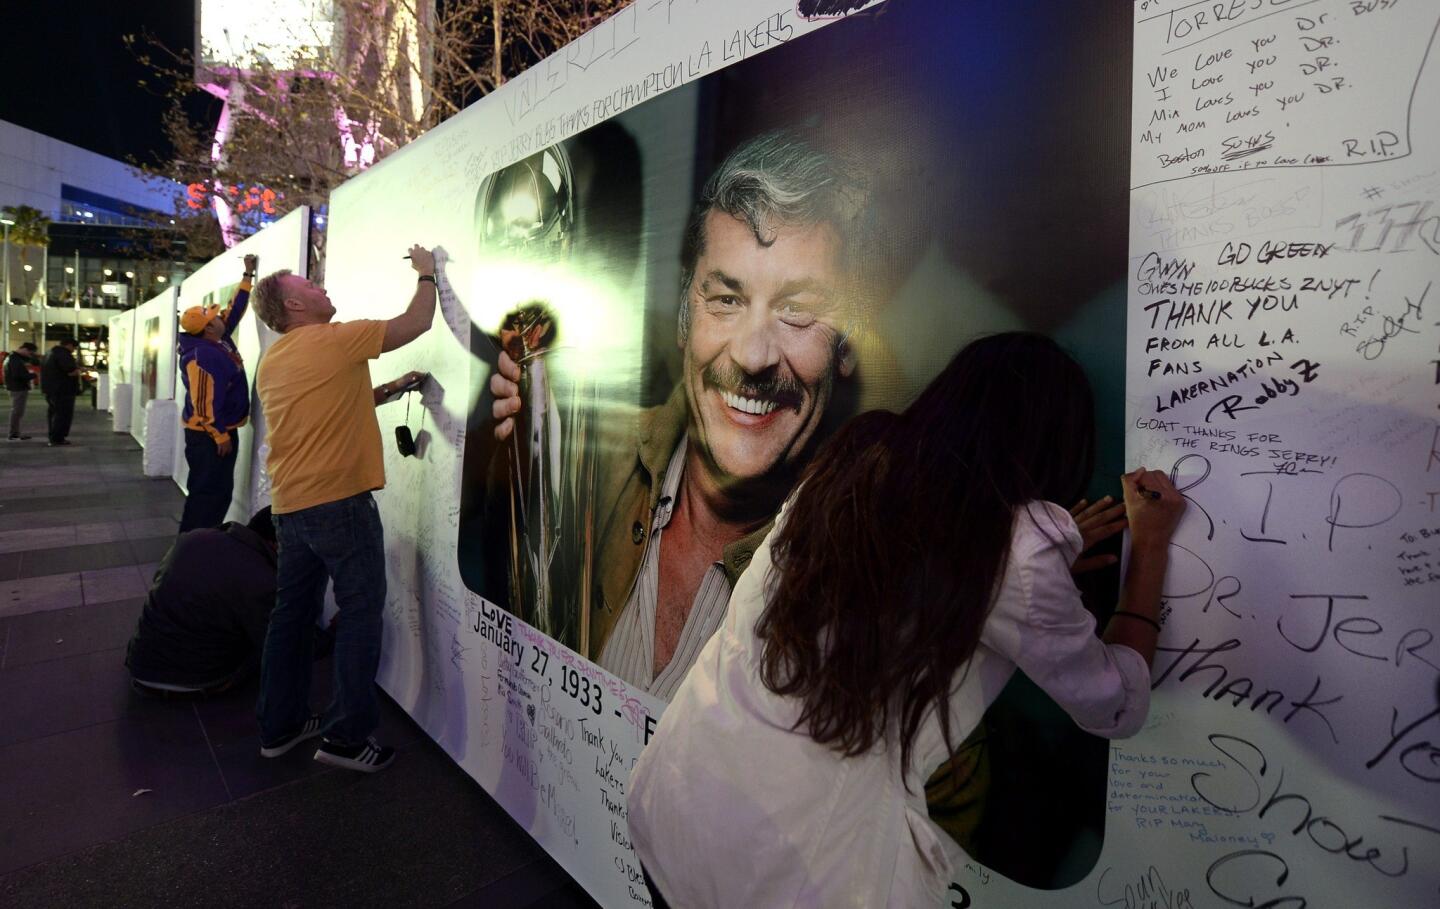 Fans sign a poster in honor of Lakers owner Jerry Buss, who died Monday at age 80, outside of Staples Center before a game against the Celtics on Wednesday night.